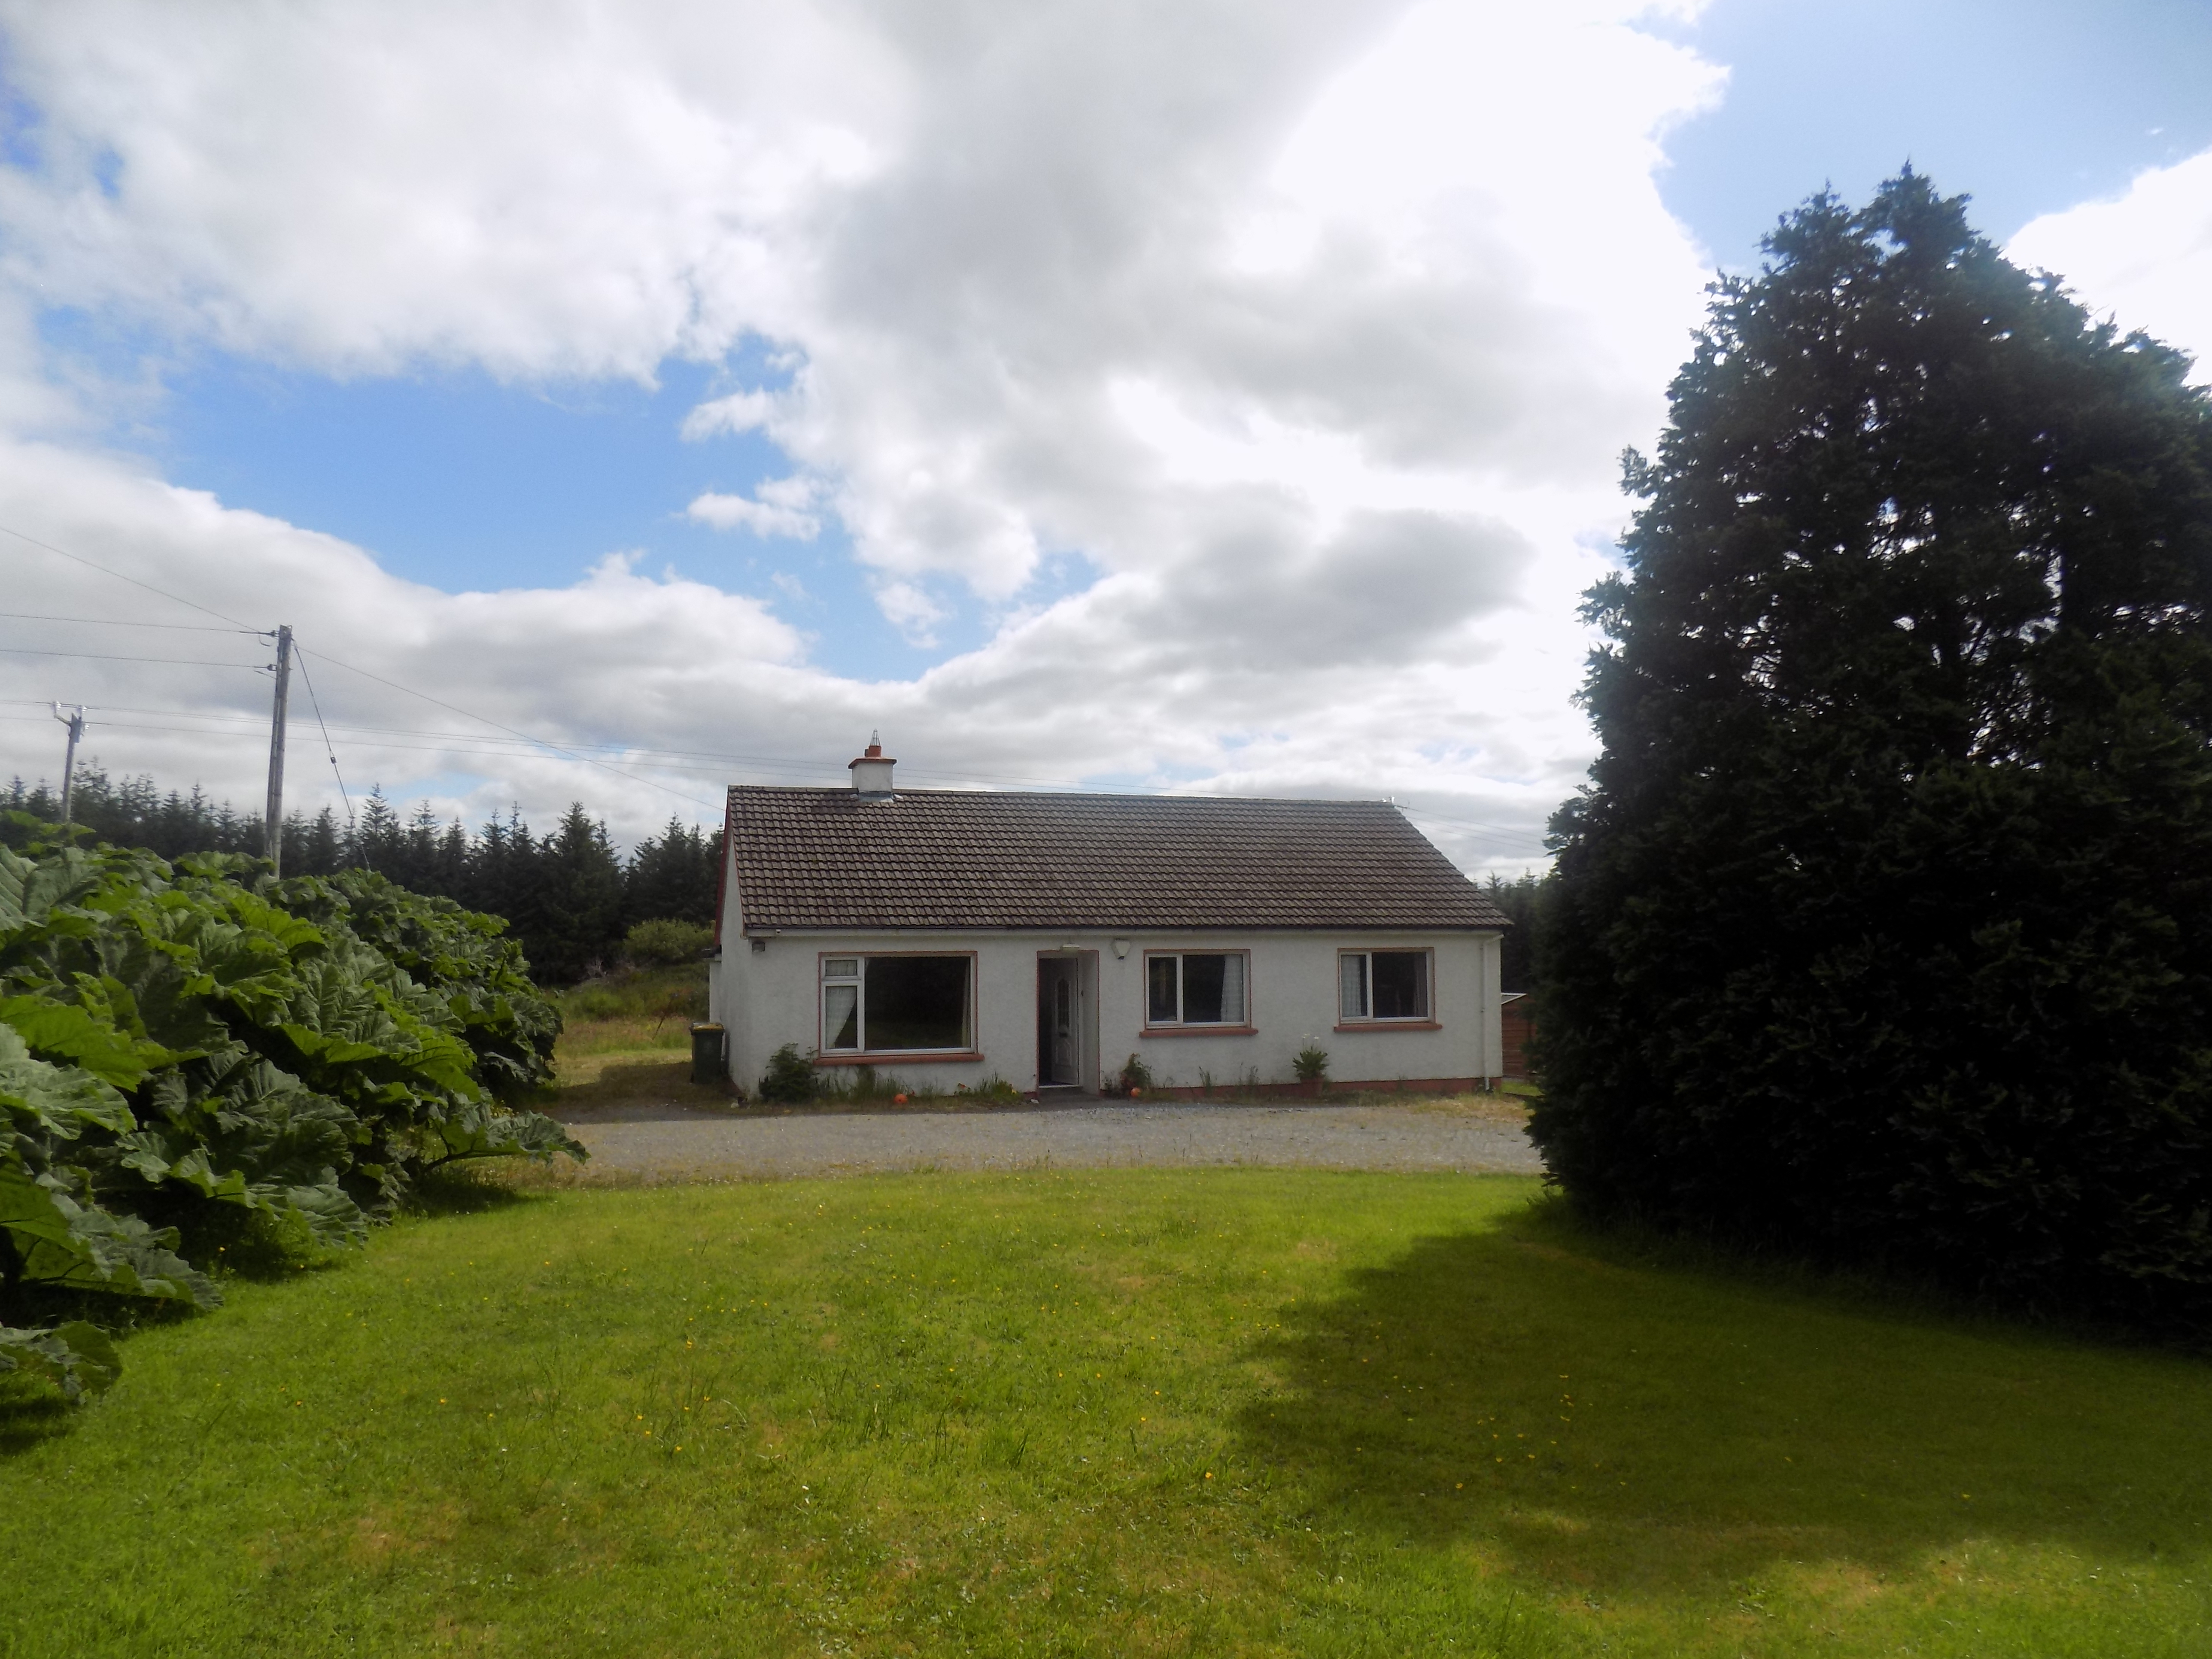 For Sale ~ 4 Bed. Single Storey House at Kenneigh, V23 A278